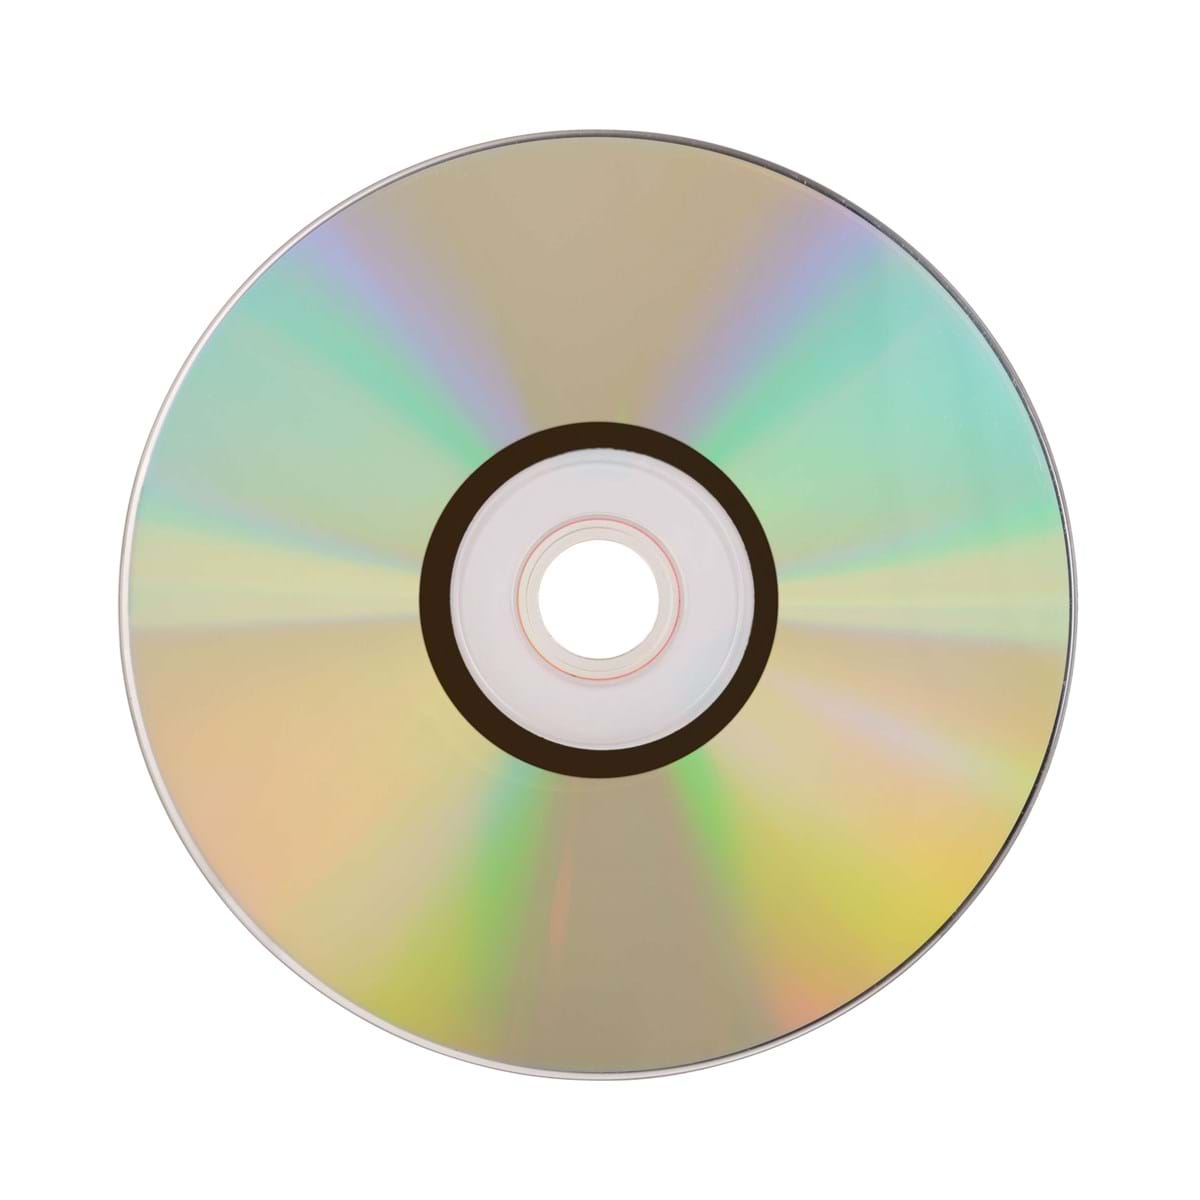 Compact Disc (CD)